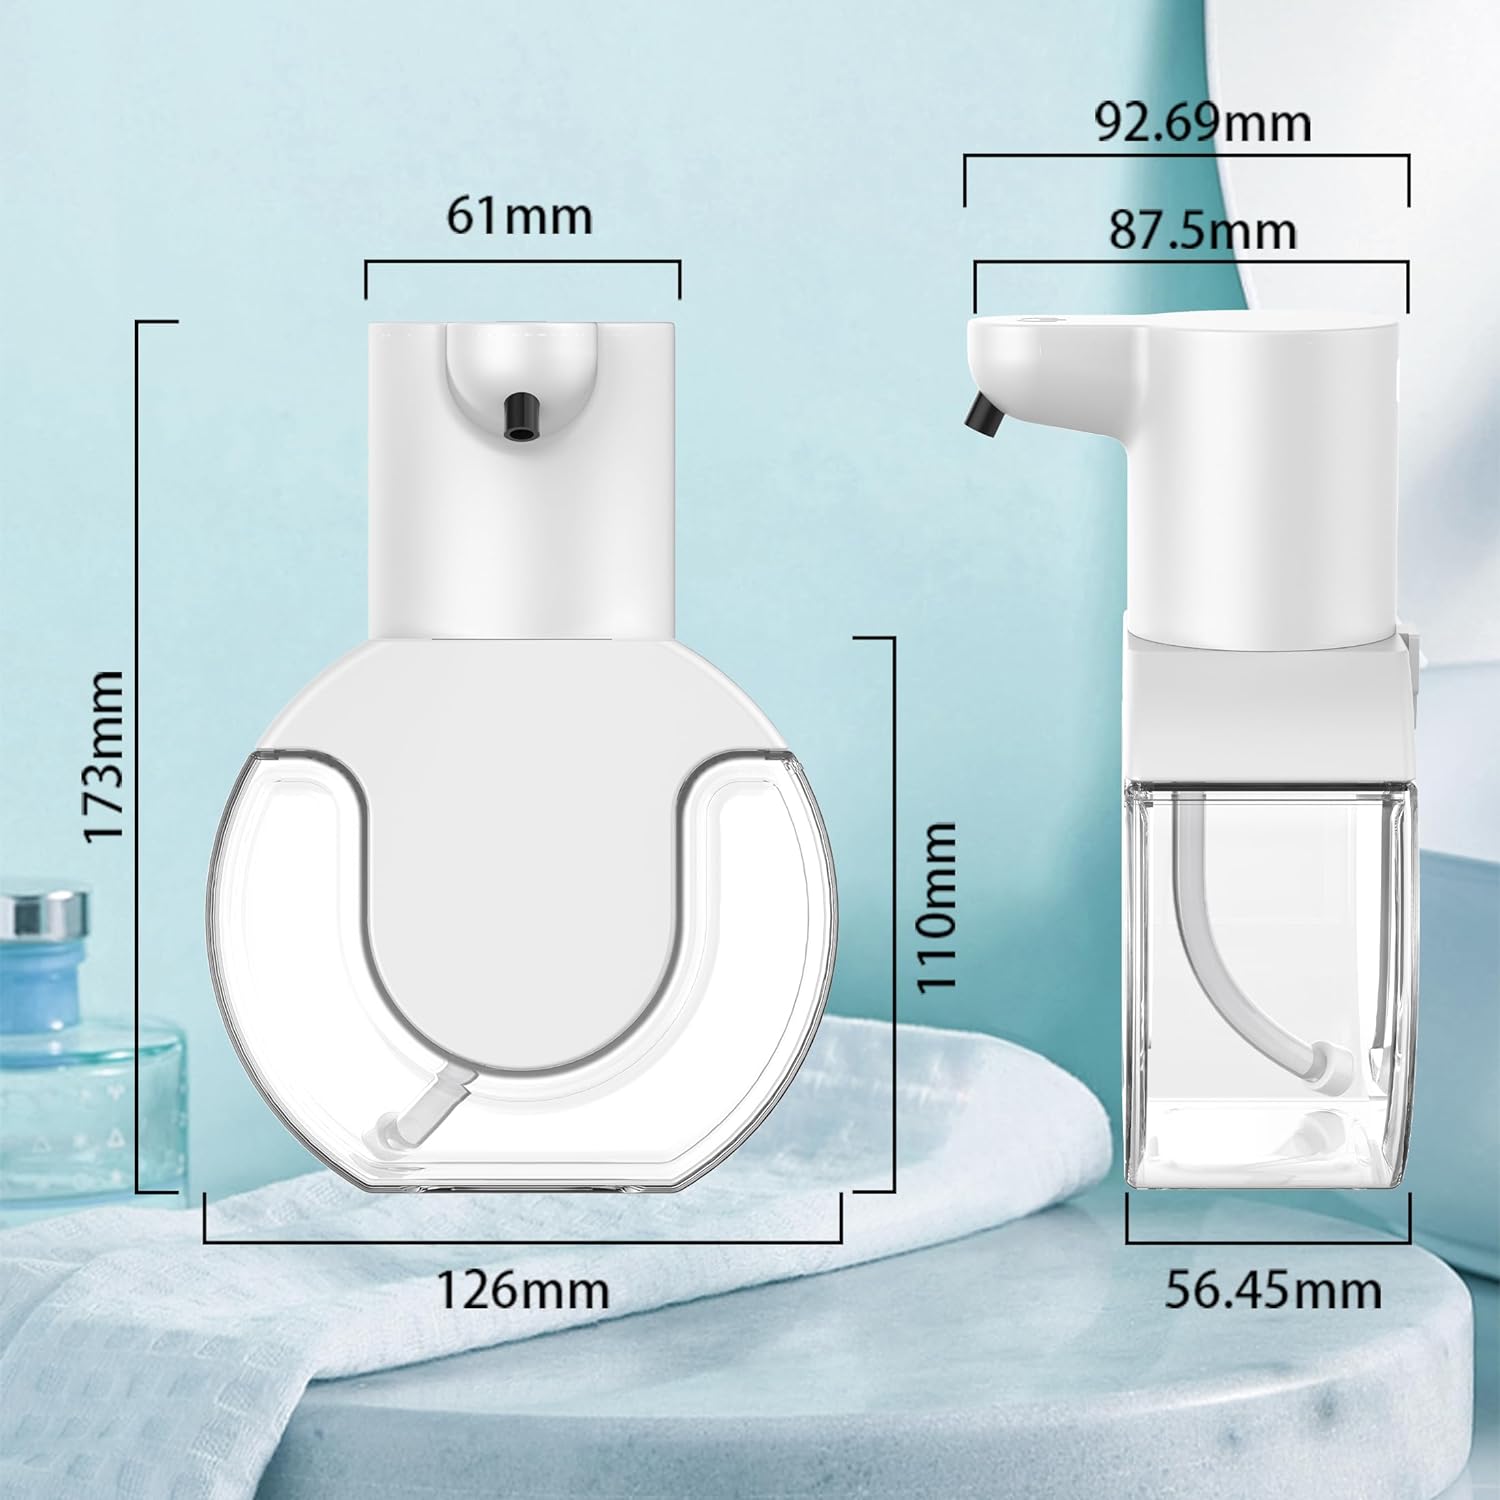 Automatic Soap Dispenser Dish Bathroom Kitchen Scrub Liquid Body Shampoo Shower Gel Hand Sanitizer Wall Mount Touchless Hand Free Rechargeable Auto Soap Dispenser Household Commercia